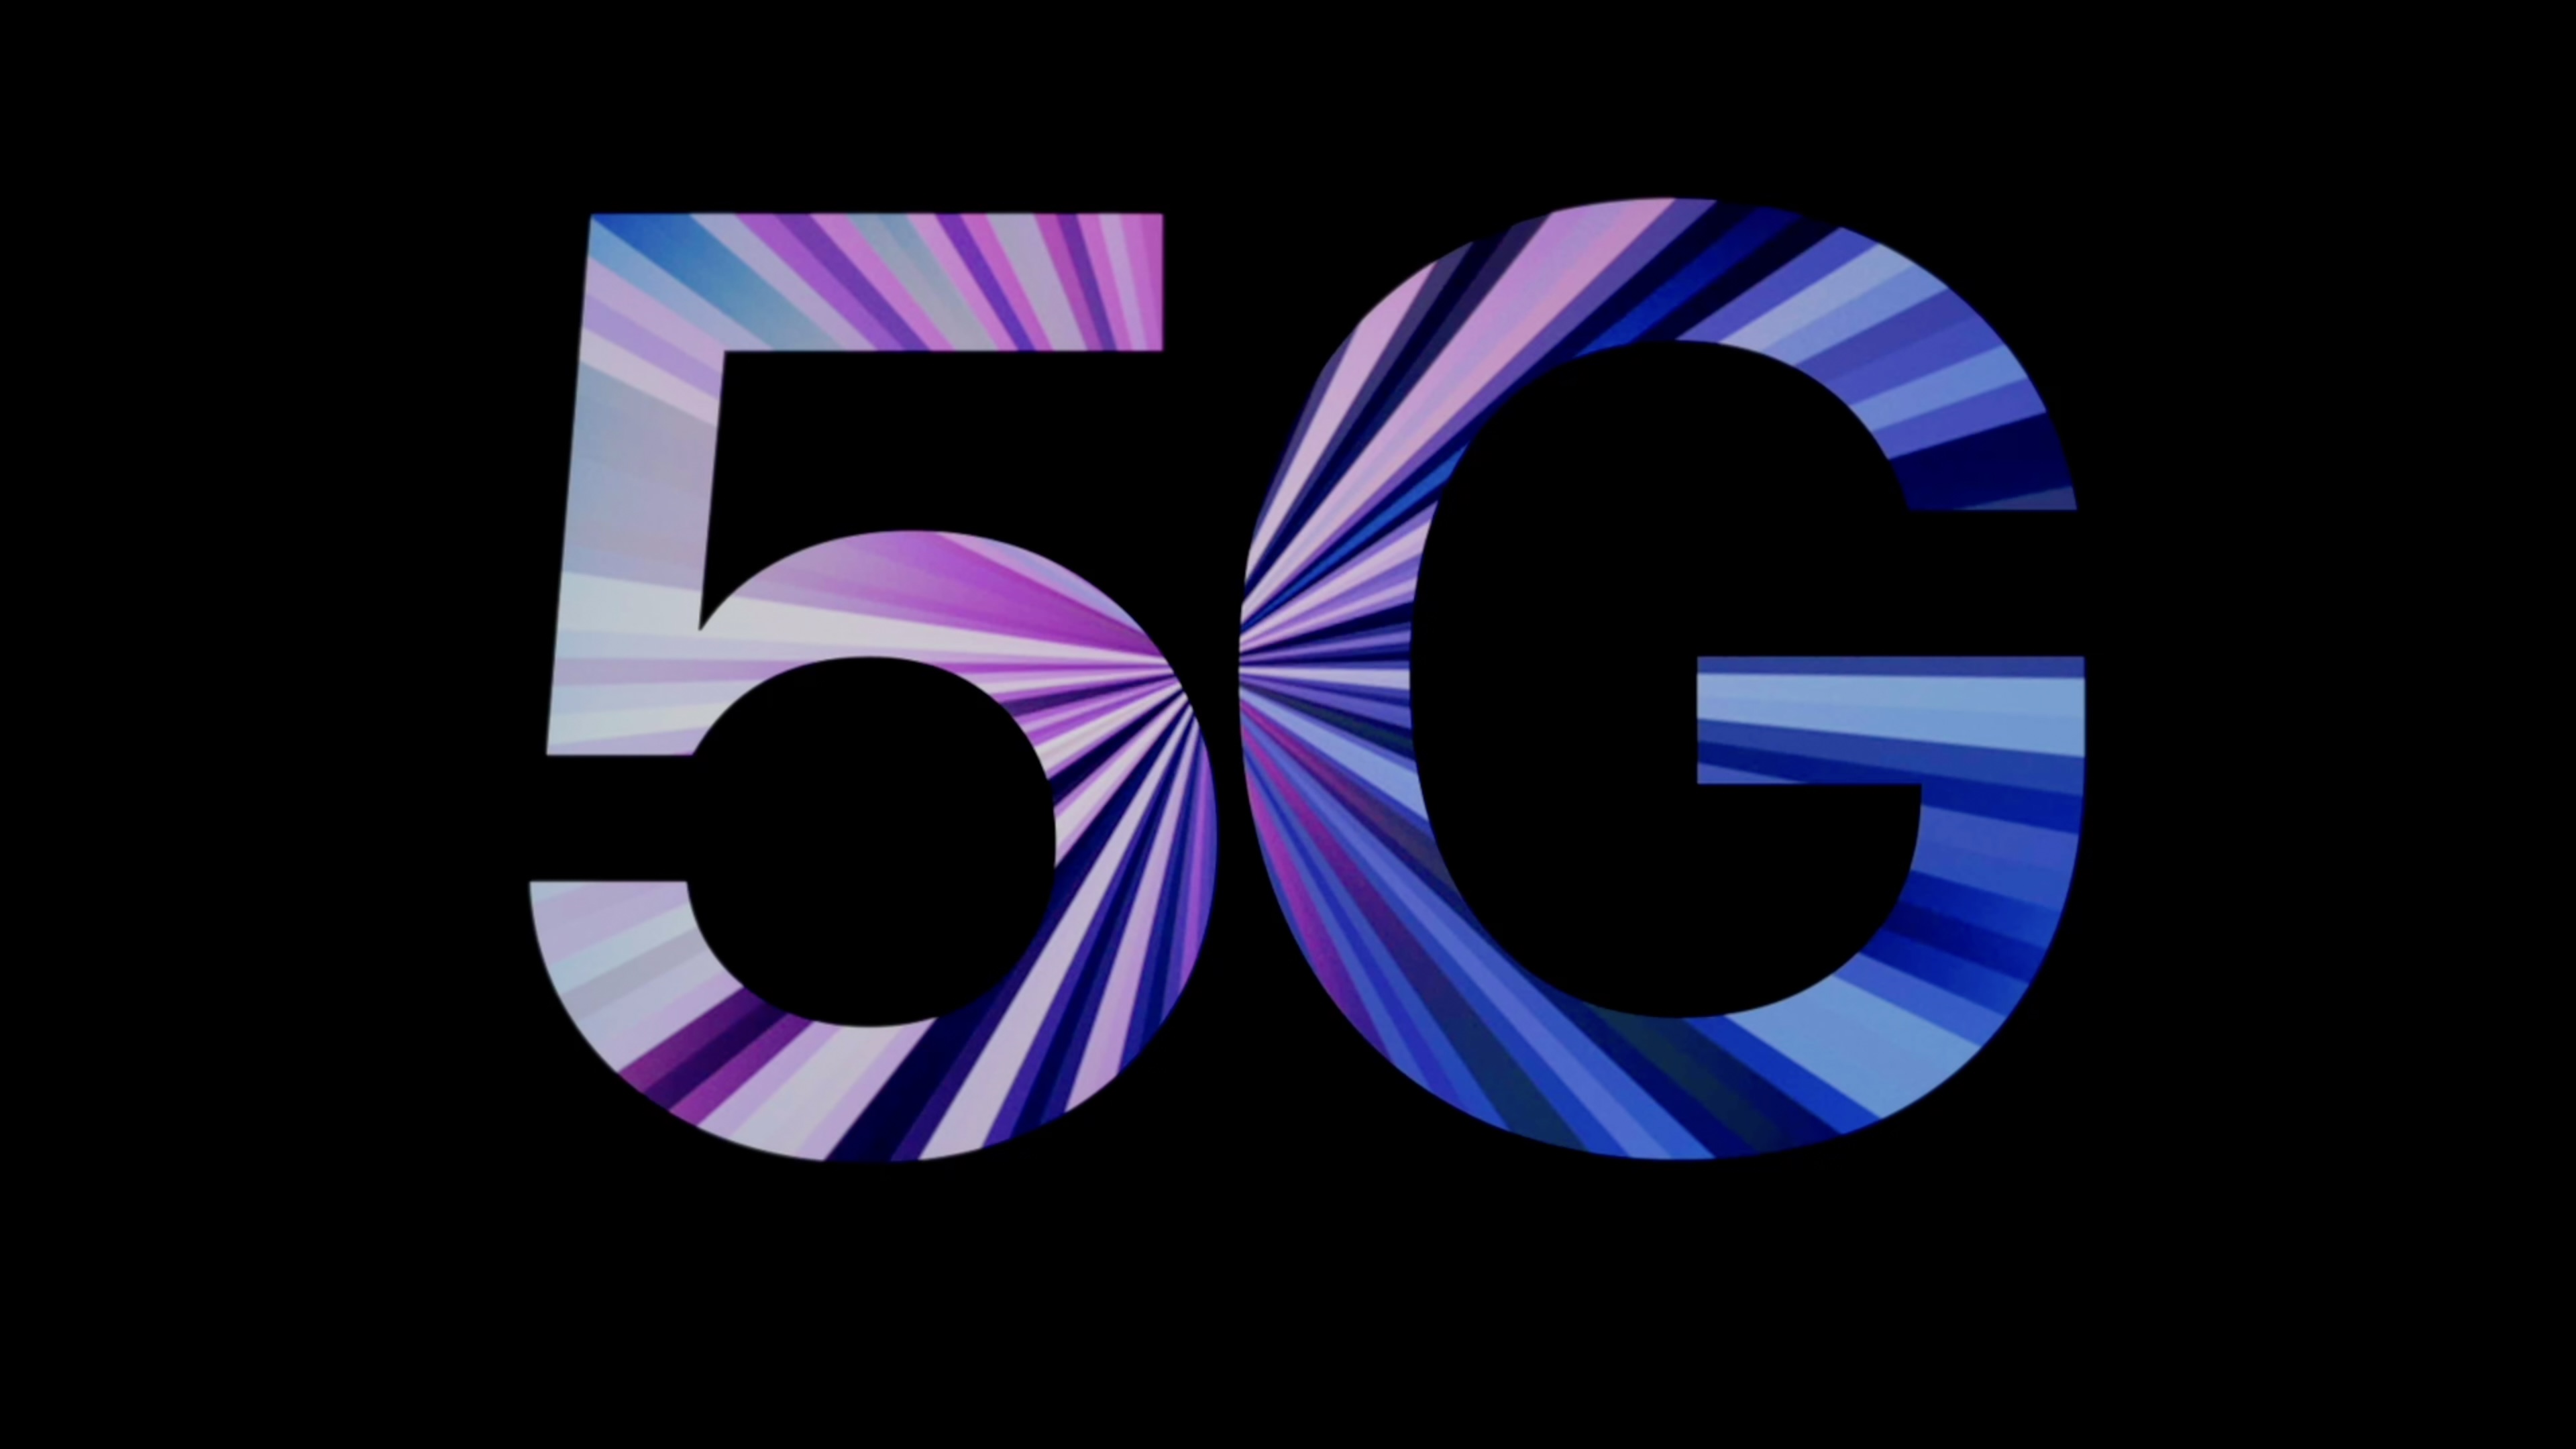 10th generation iPad is expected to support 5G.